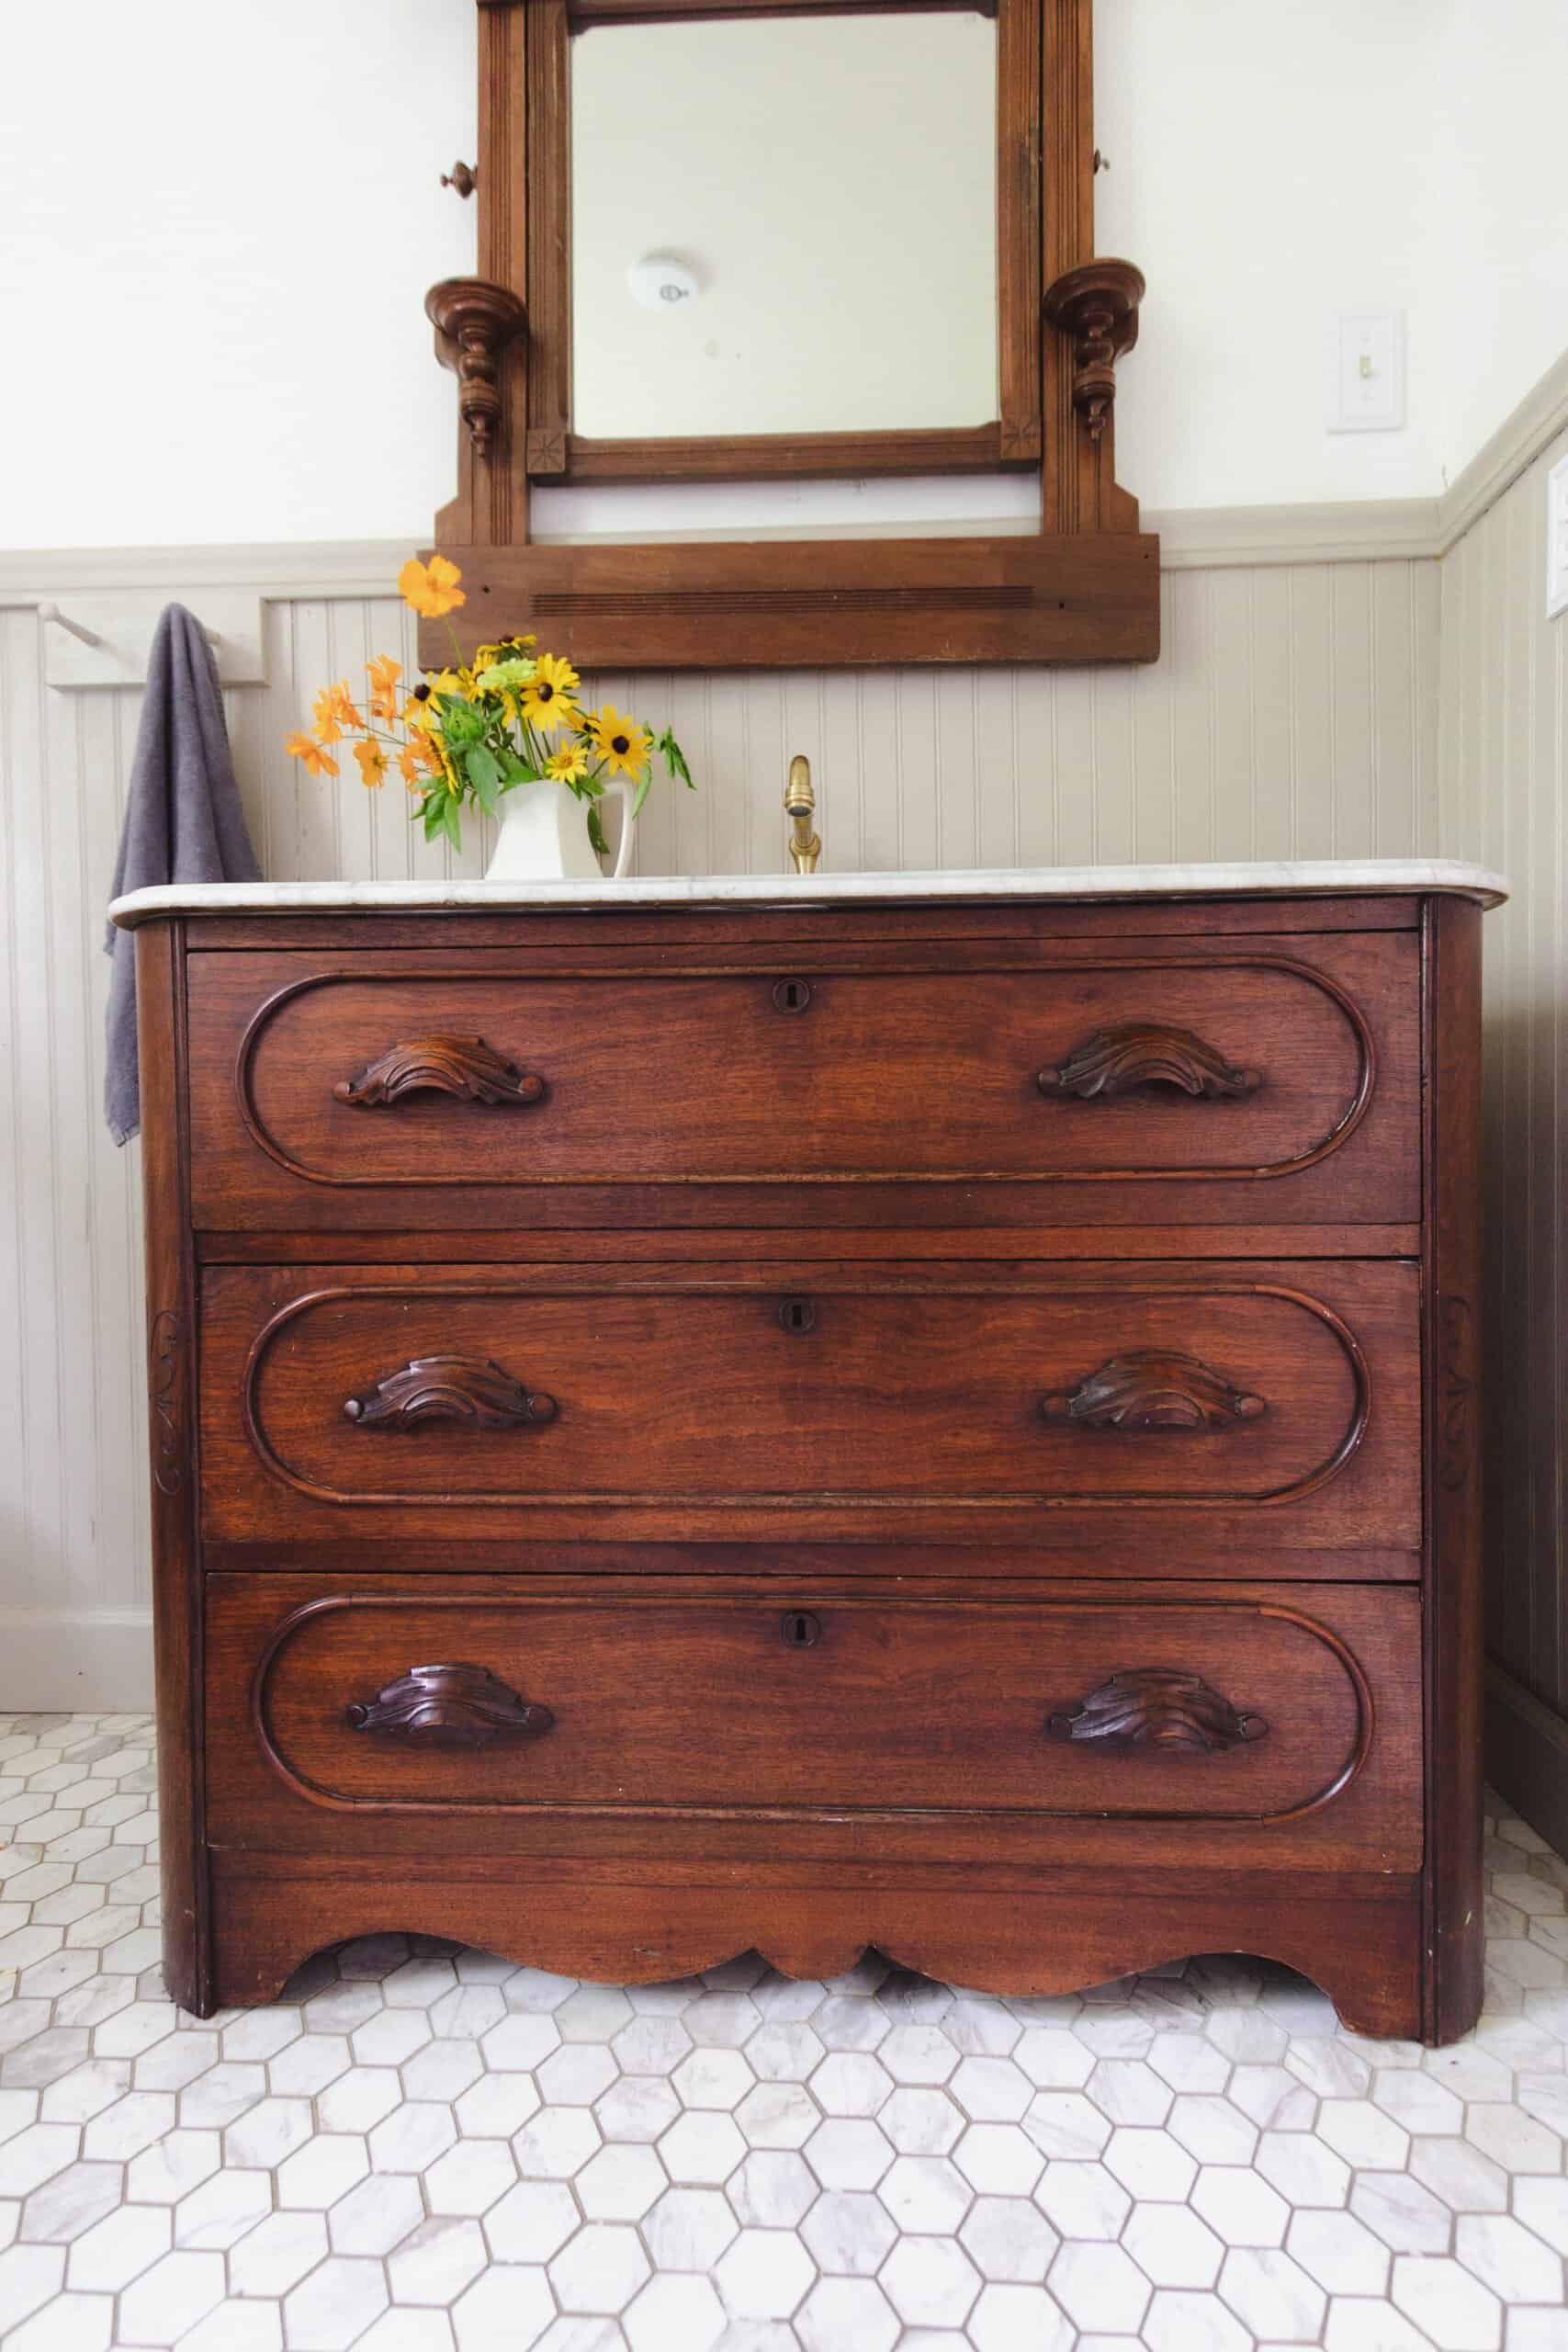 How To Make a Dresser Into a Vanity Tutorial - An Oregon Cottage